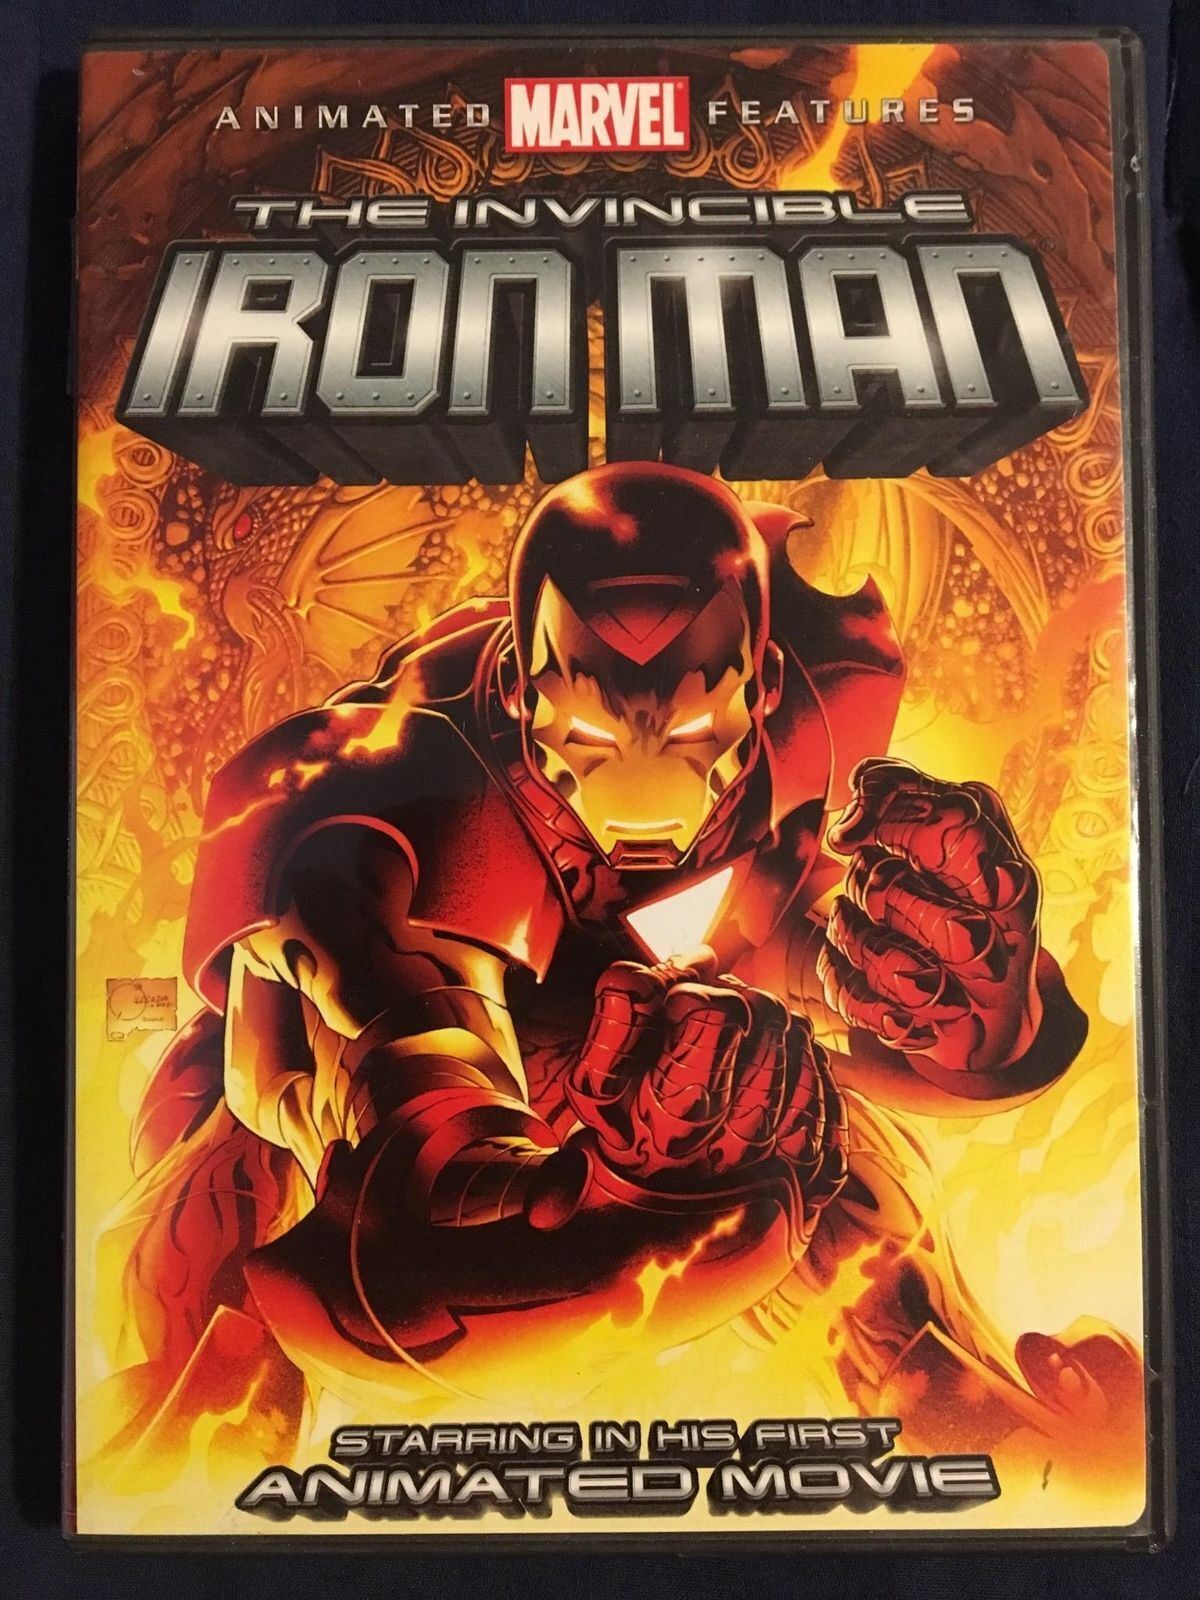 The Invincible Iron Man (DVD, 2007, Animated Marvel) - J0917